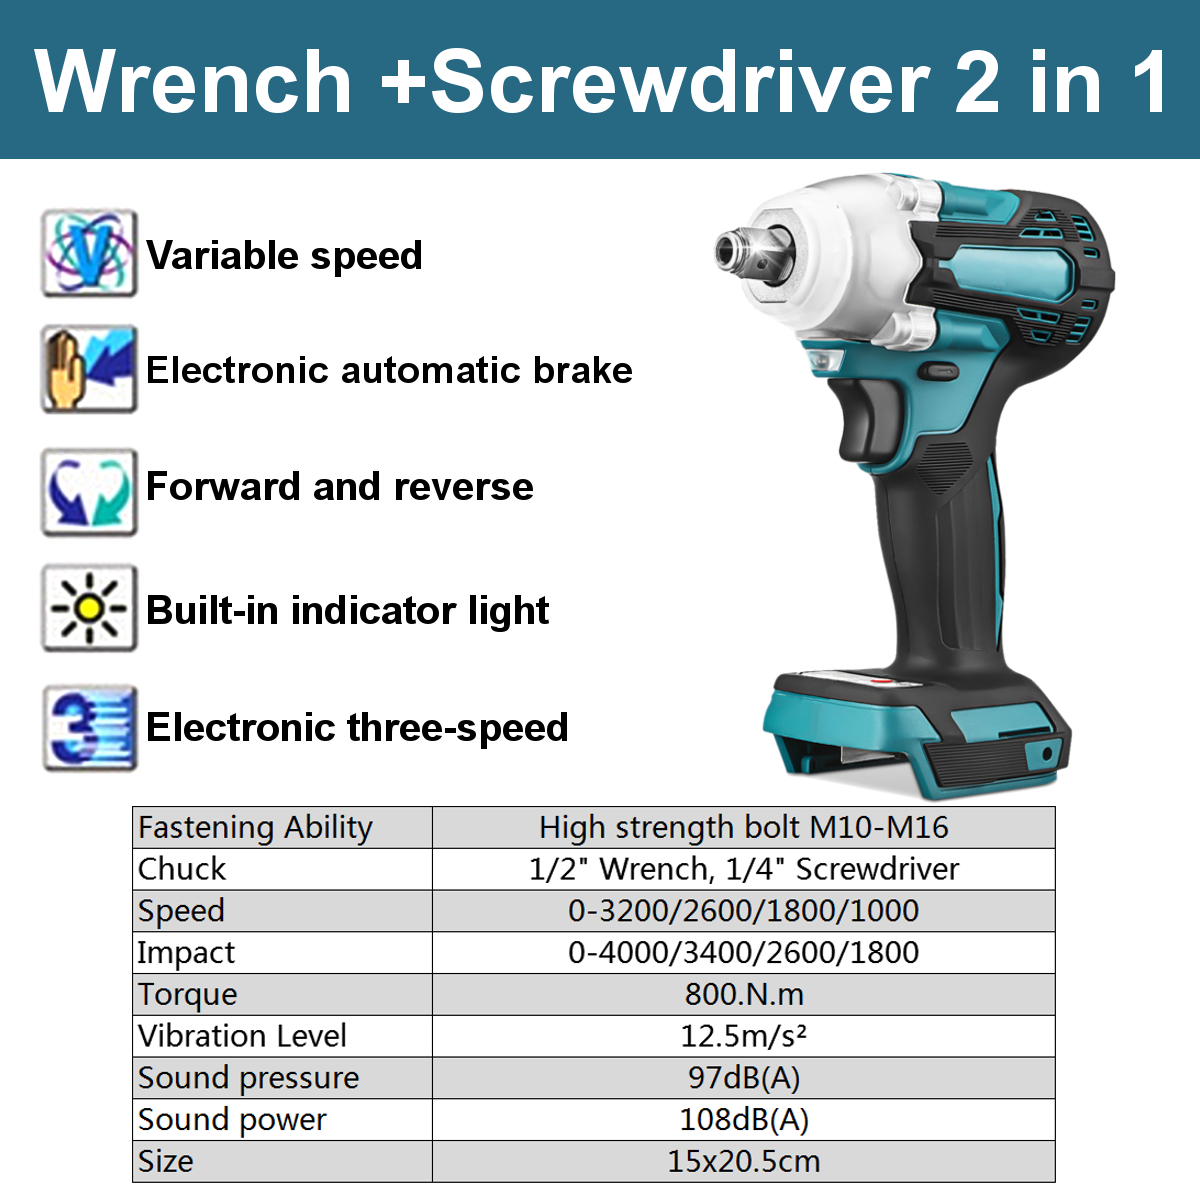 DTW300-2-in1-18V-800Nm-Li-Ion-Brushless-Cordless-12quot-Electric-Wrench-14quotScrewdriver-Drill-Repl-1854869-5